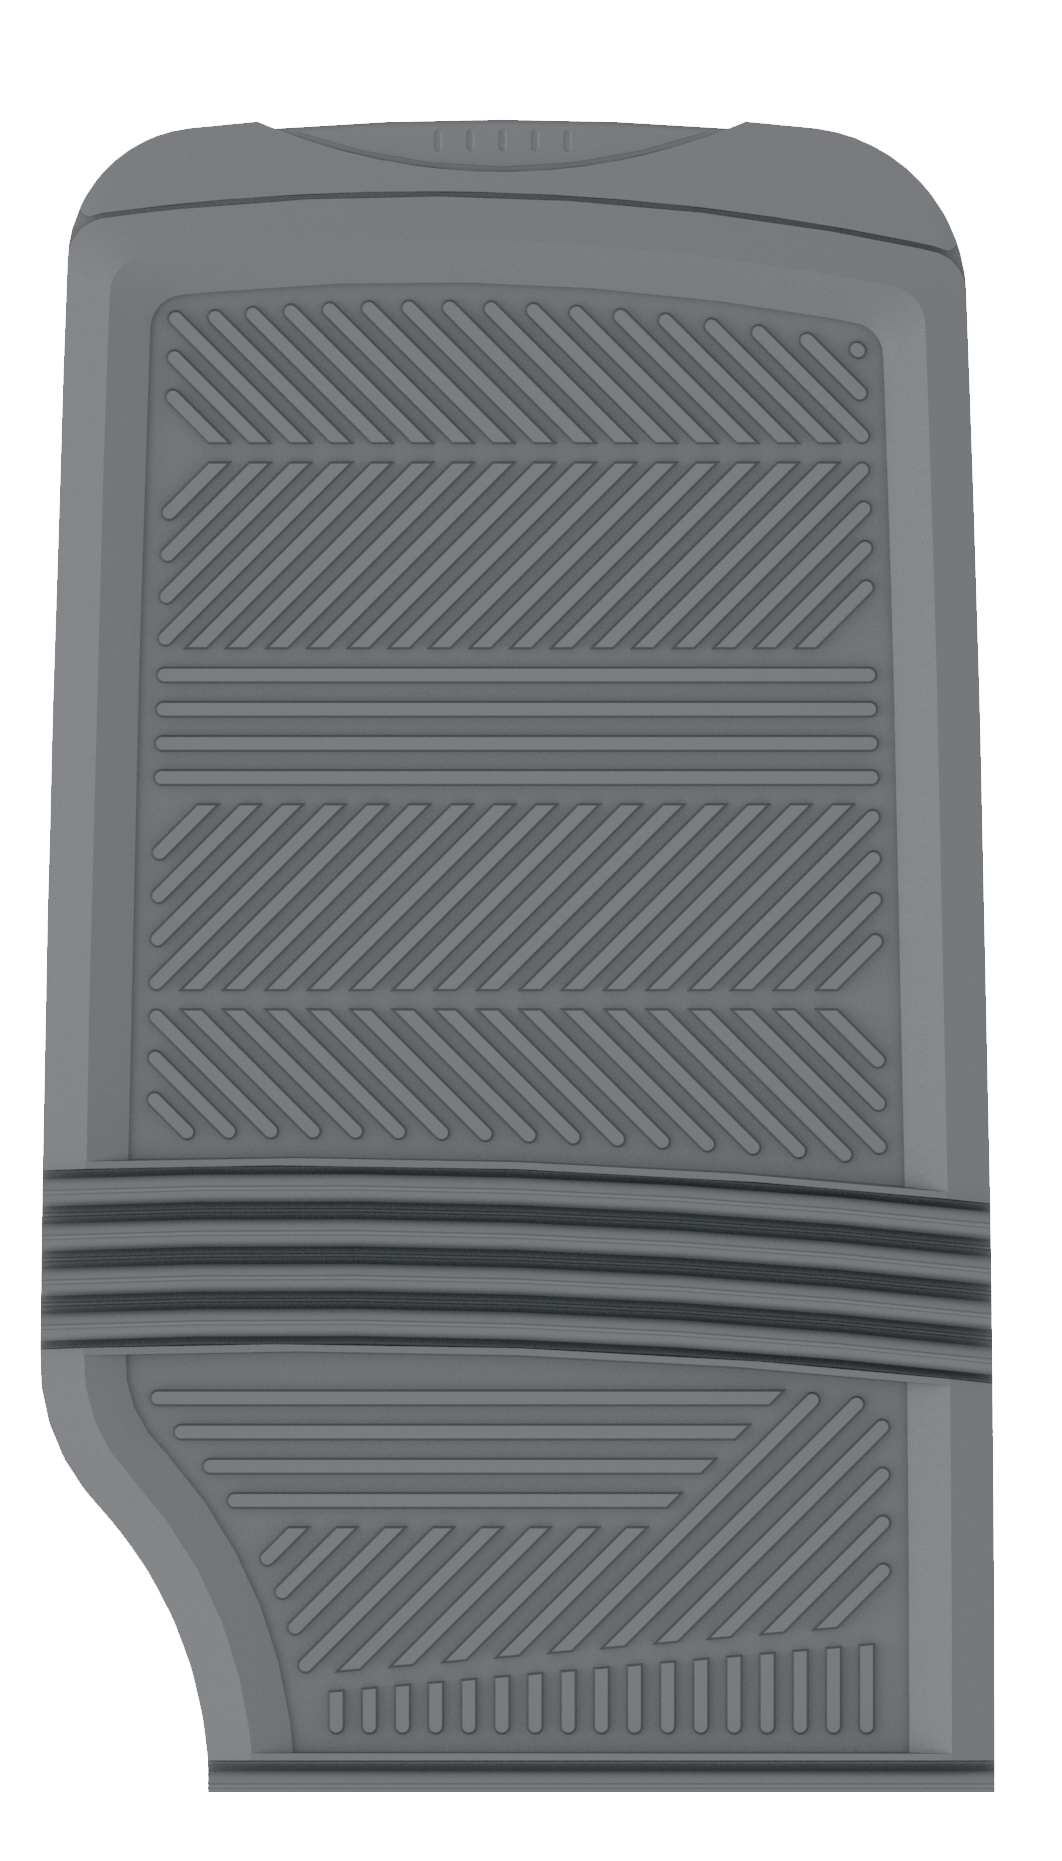 Remington Industries 1pc Rubber Runner, Grey - image 2 of 2